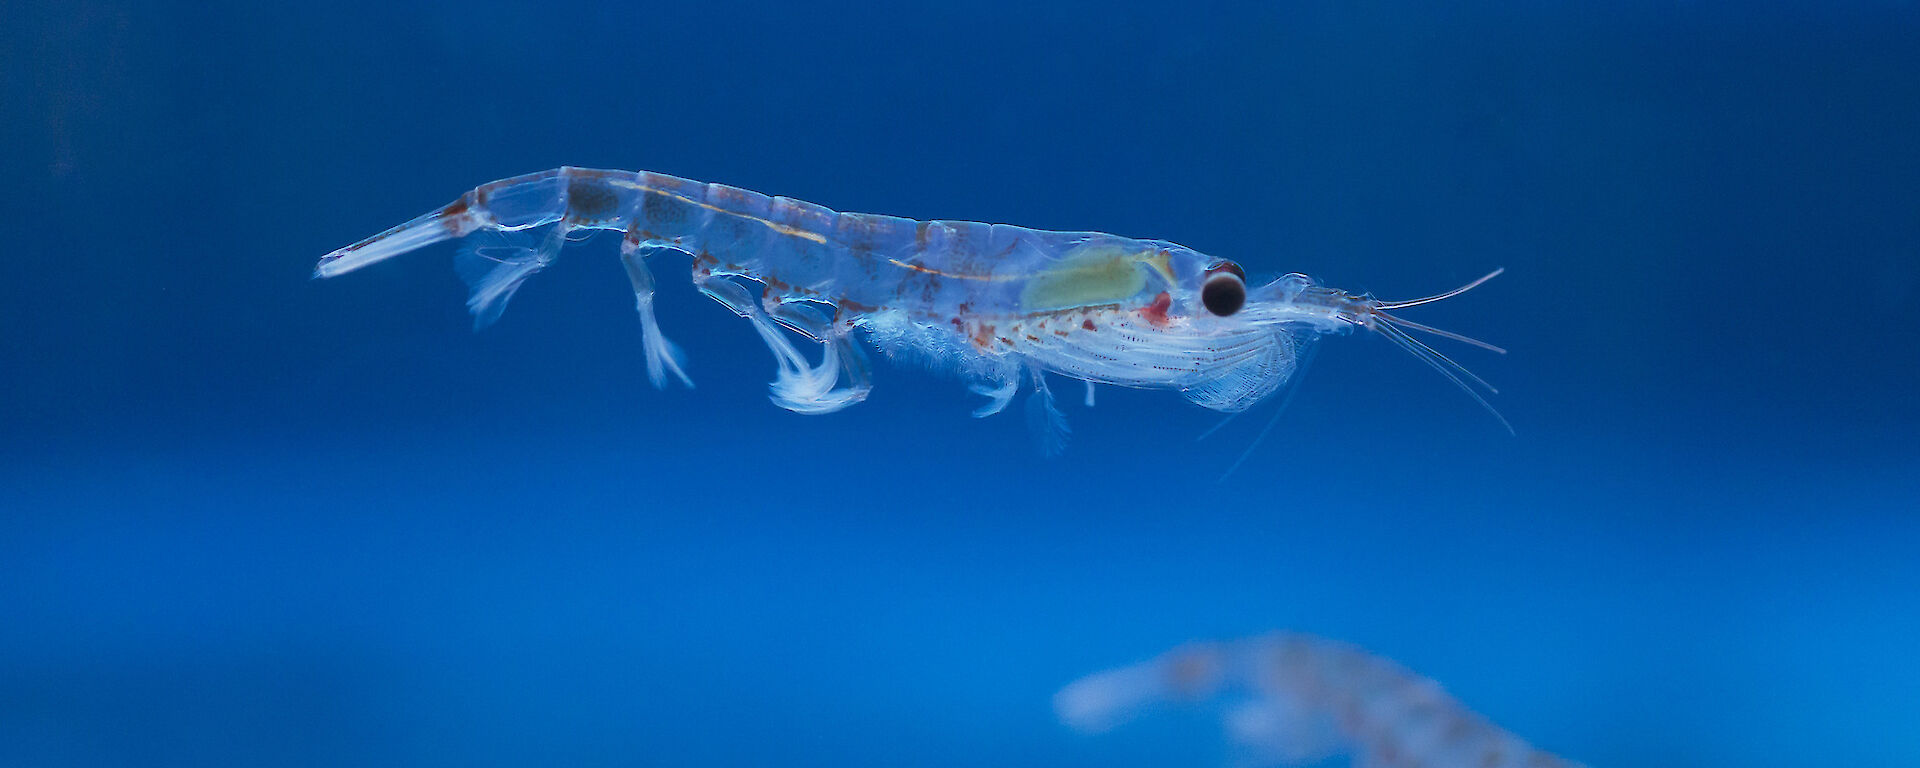 Krill swimming in blue water